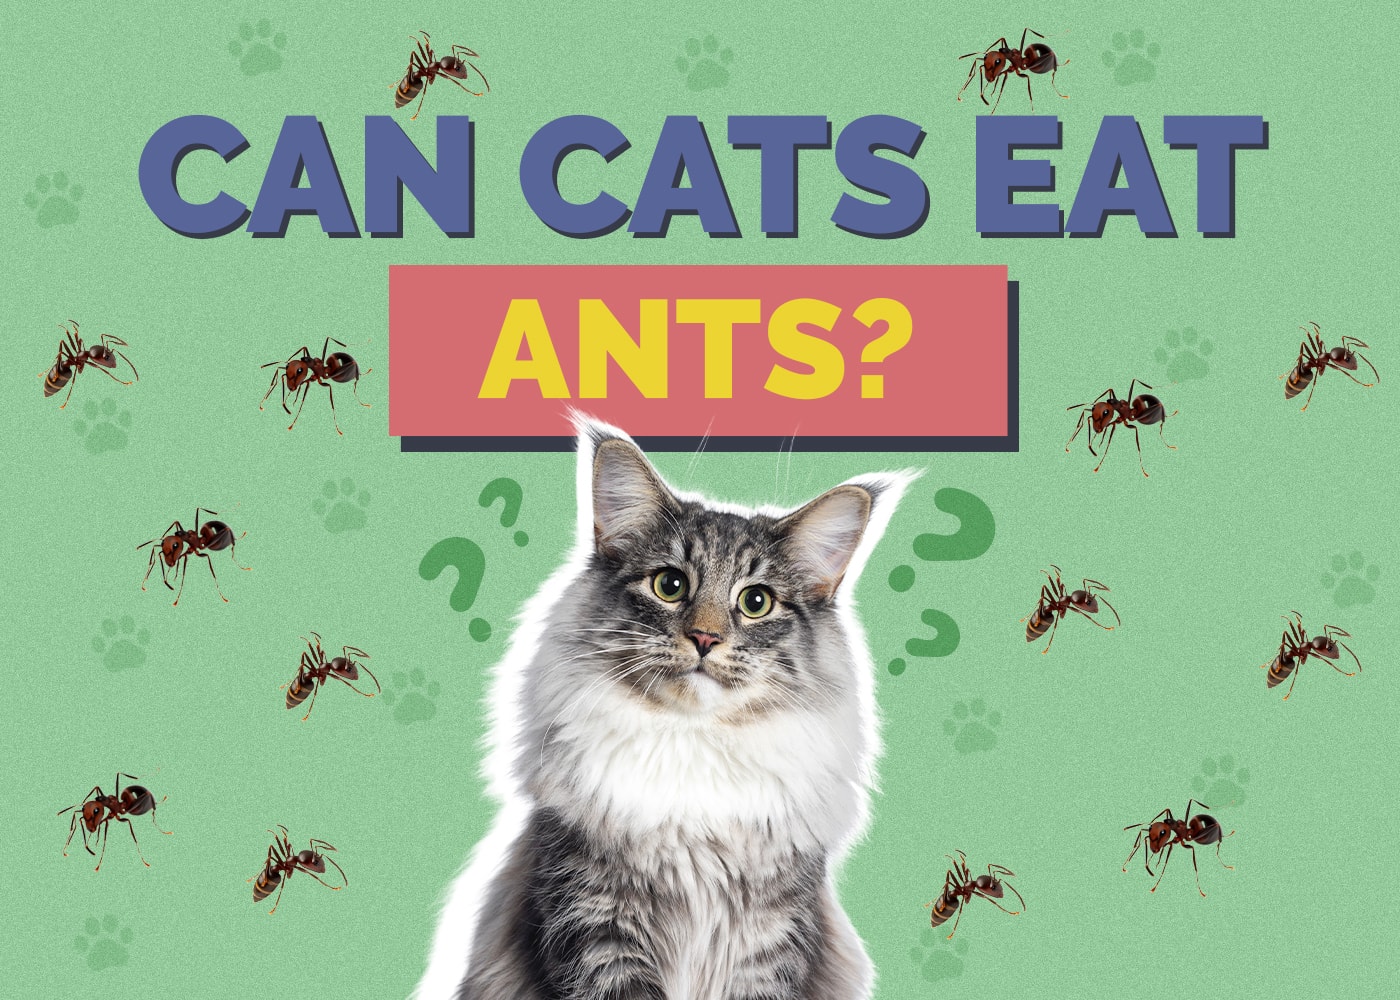 Can Cats Eat ants